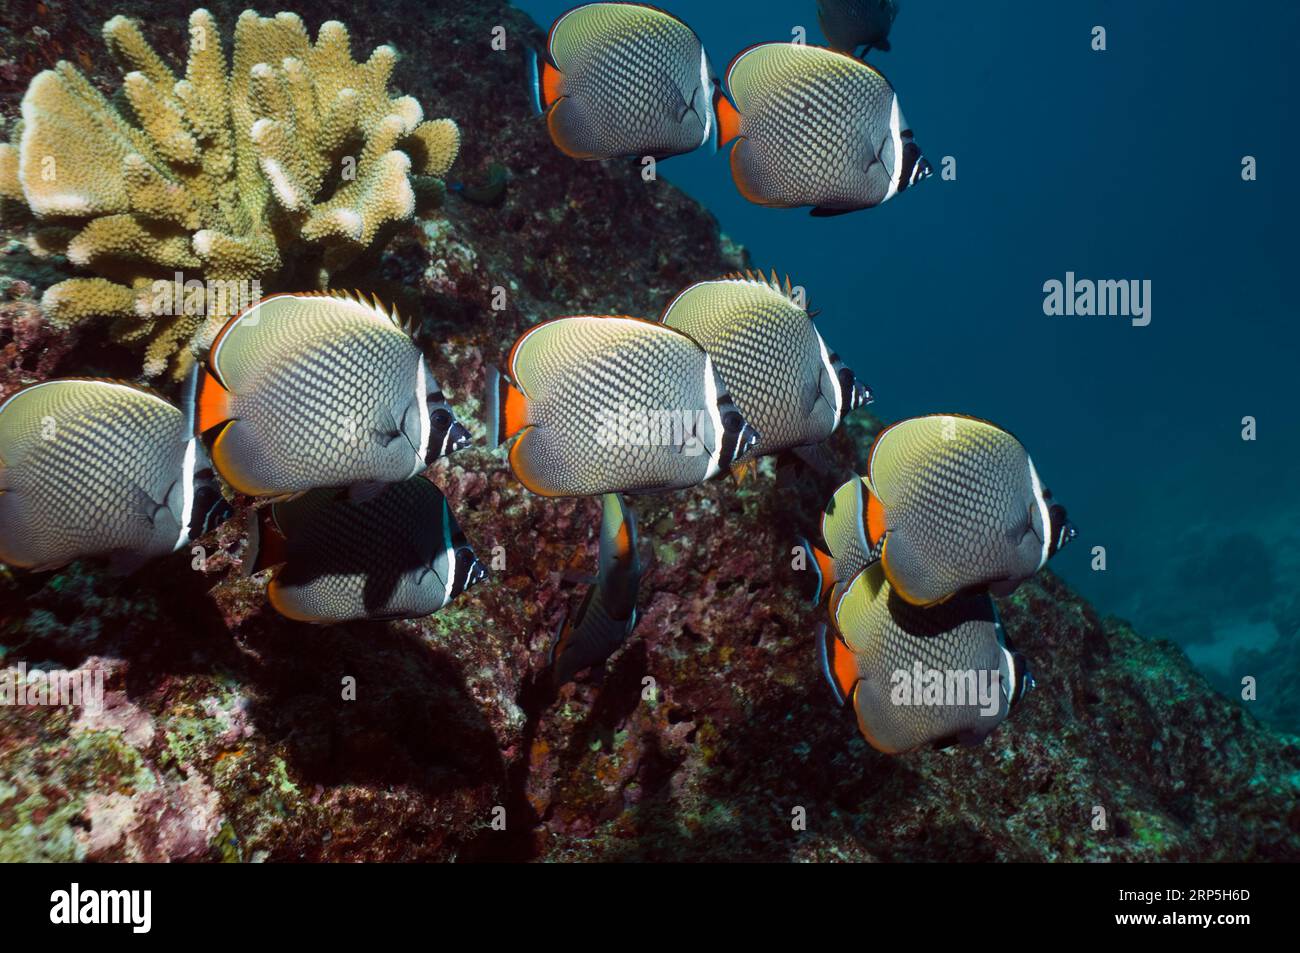 Redtail or Collared butterflyfish (Chaetodon collare).  Andaman Sea, Thailand. Stock Photo